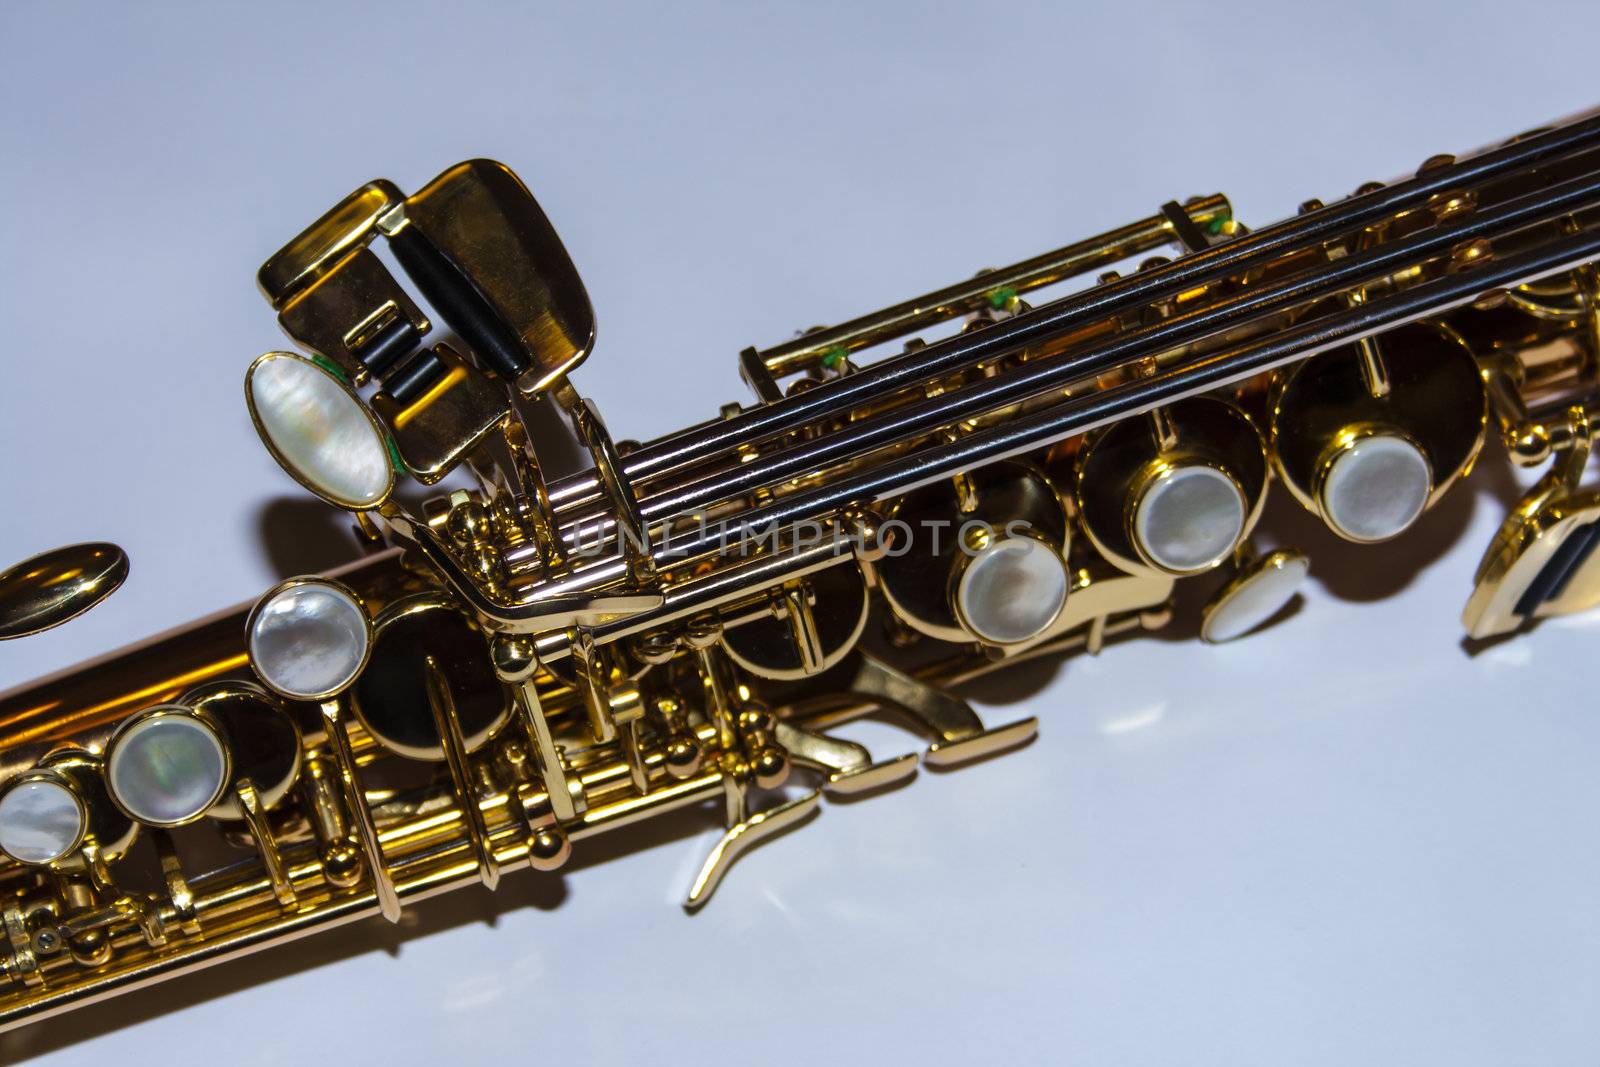 Details of the flap system of a soprano saxophone